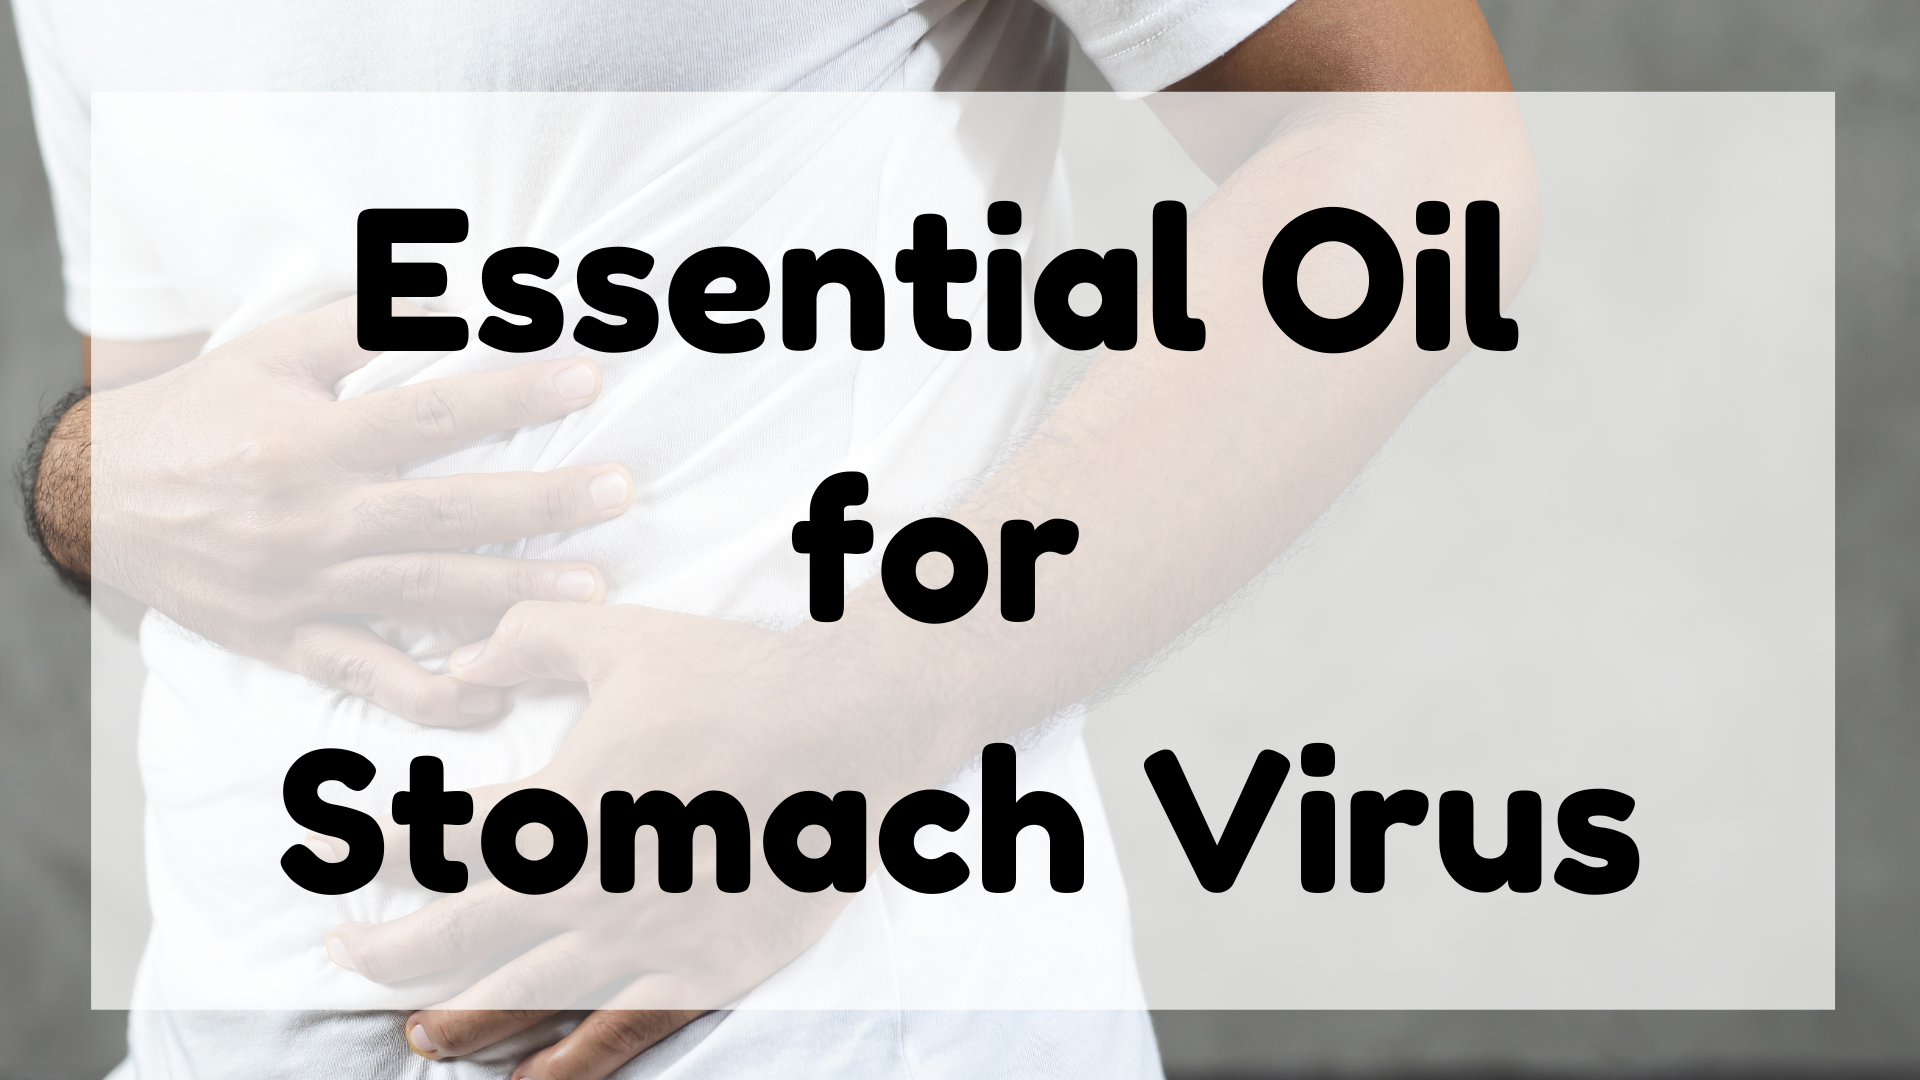 Essential Oil for Stomach Virus featured image